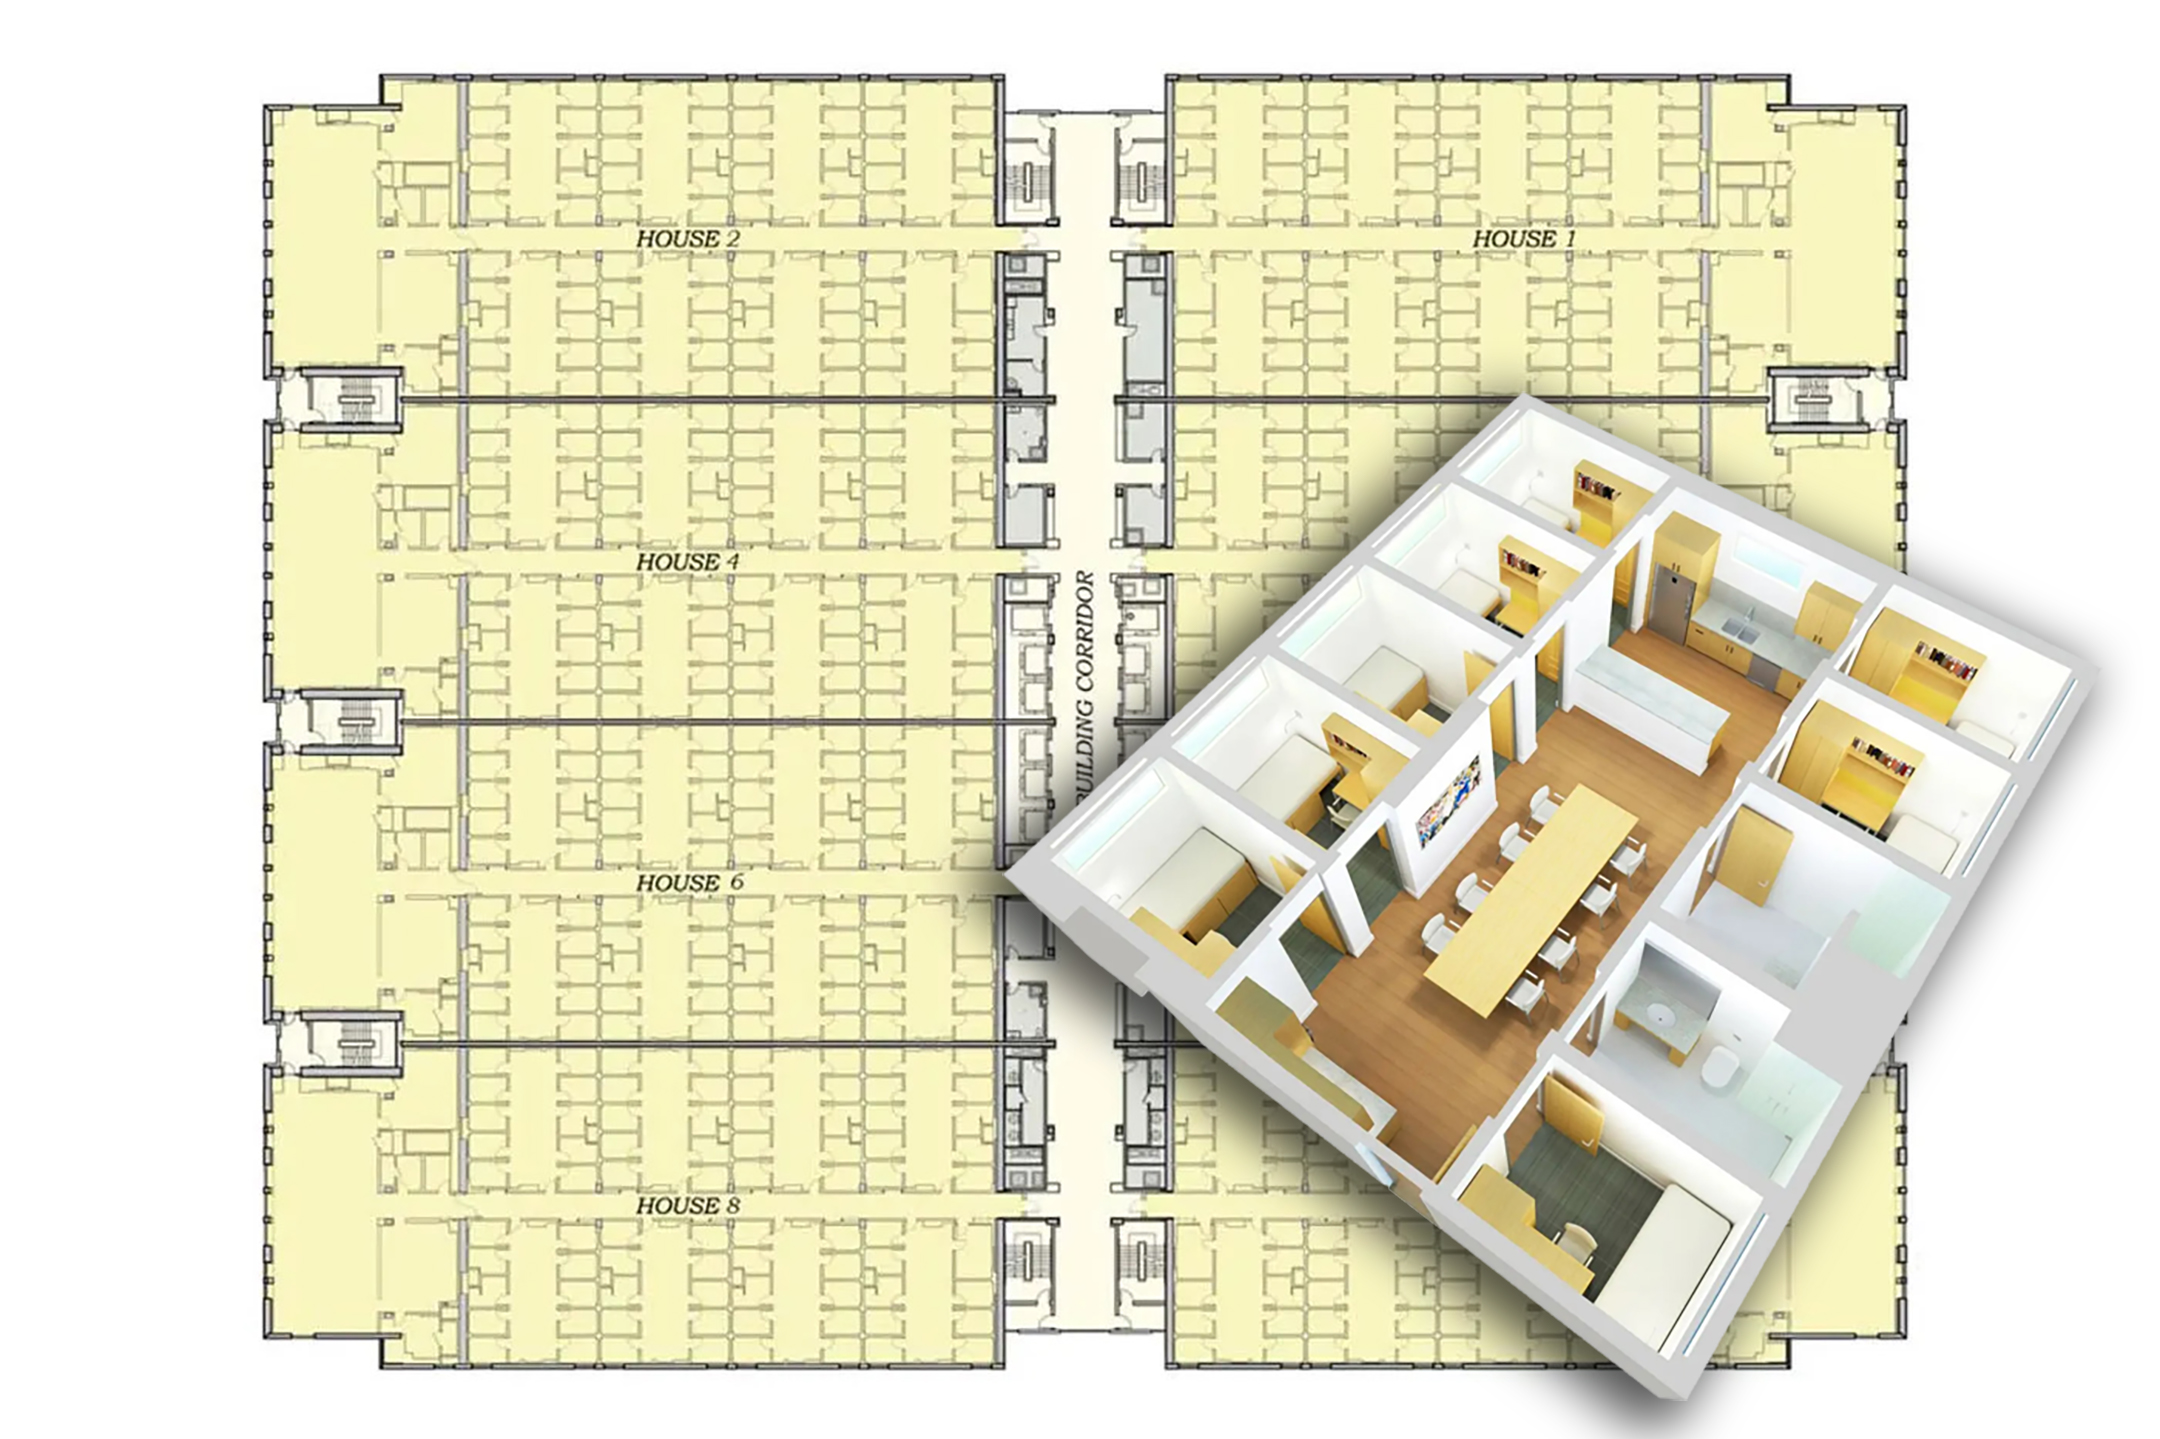 Diagram of a floor of dorm rooms, in yellow, with a rendering of a pod of rooms inset on the bottom right